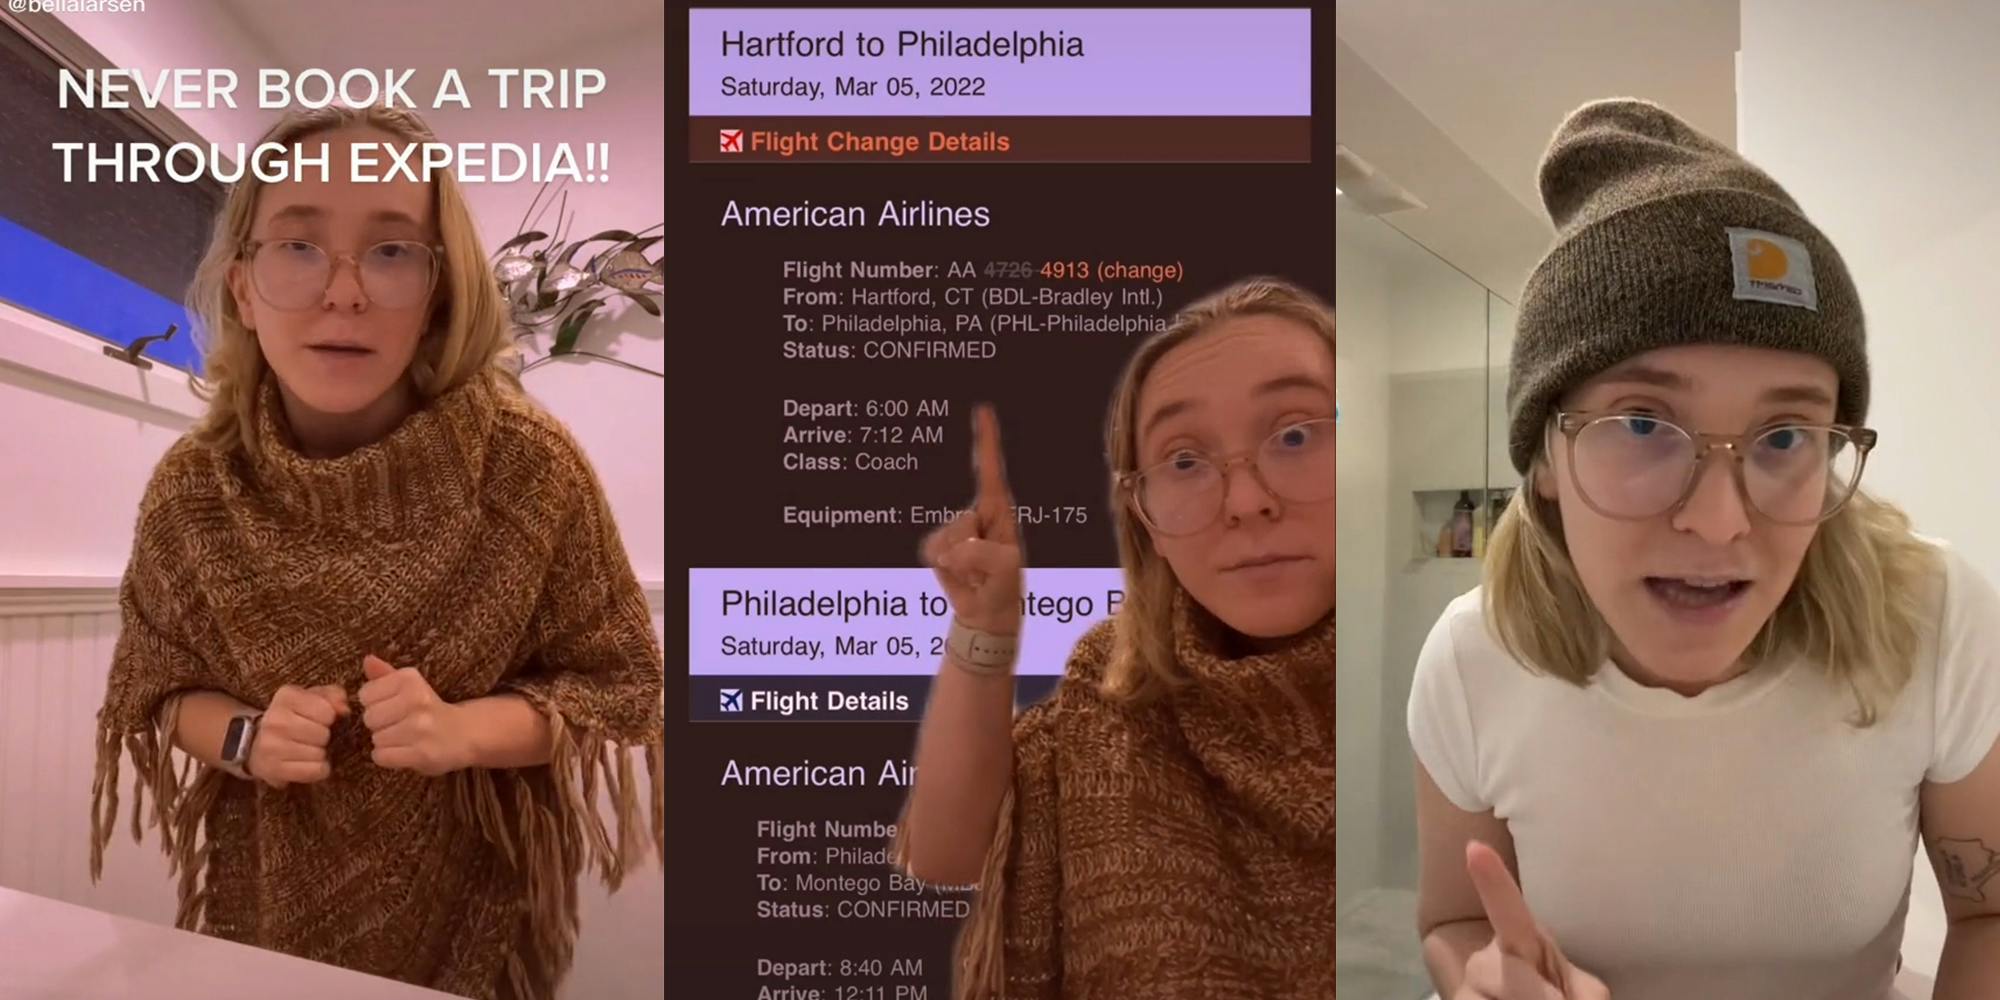 young woman with caption 'Never book a trip through expedia' (l) pointing at flight booking (c) speaking with hat on (r)